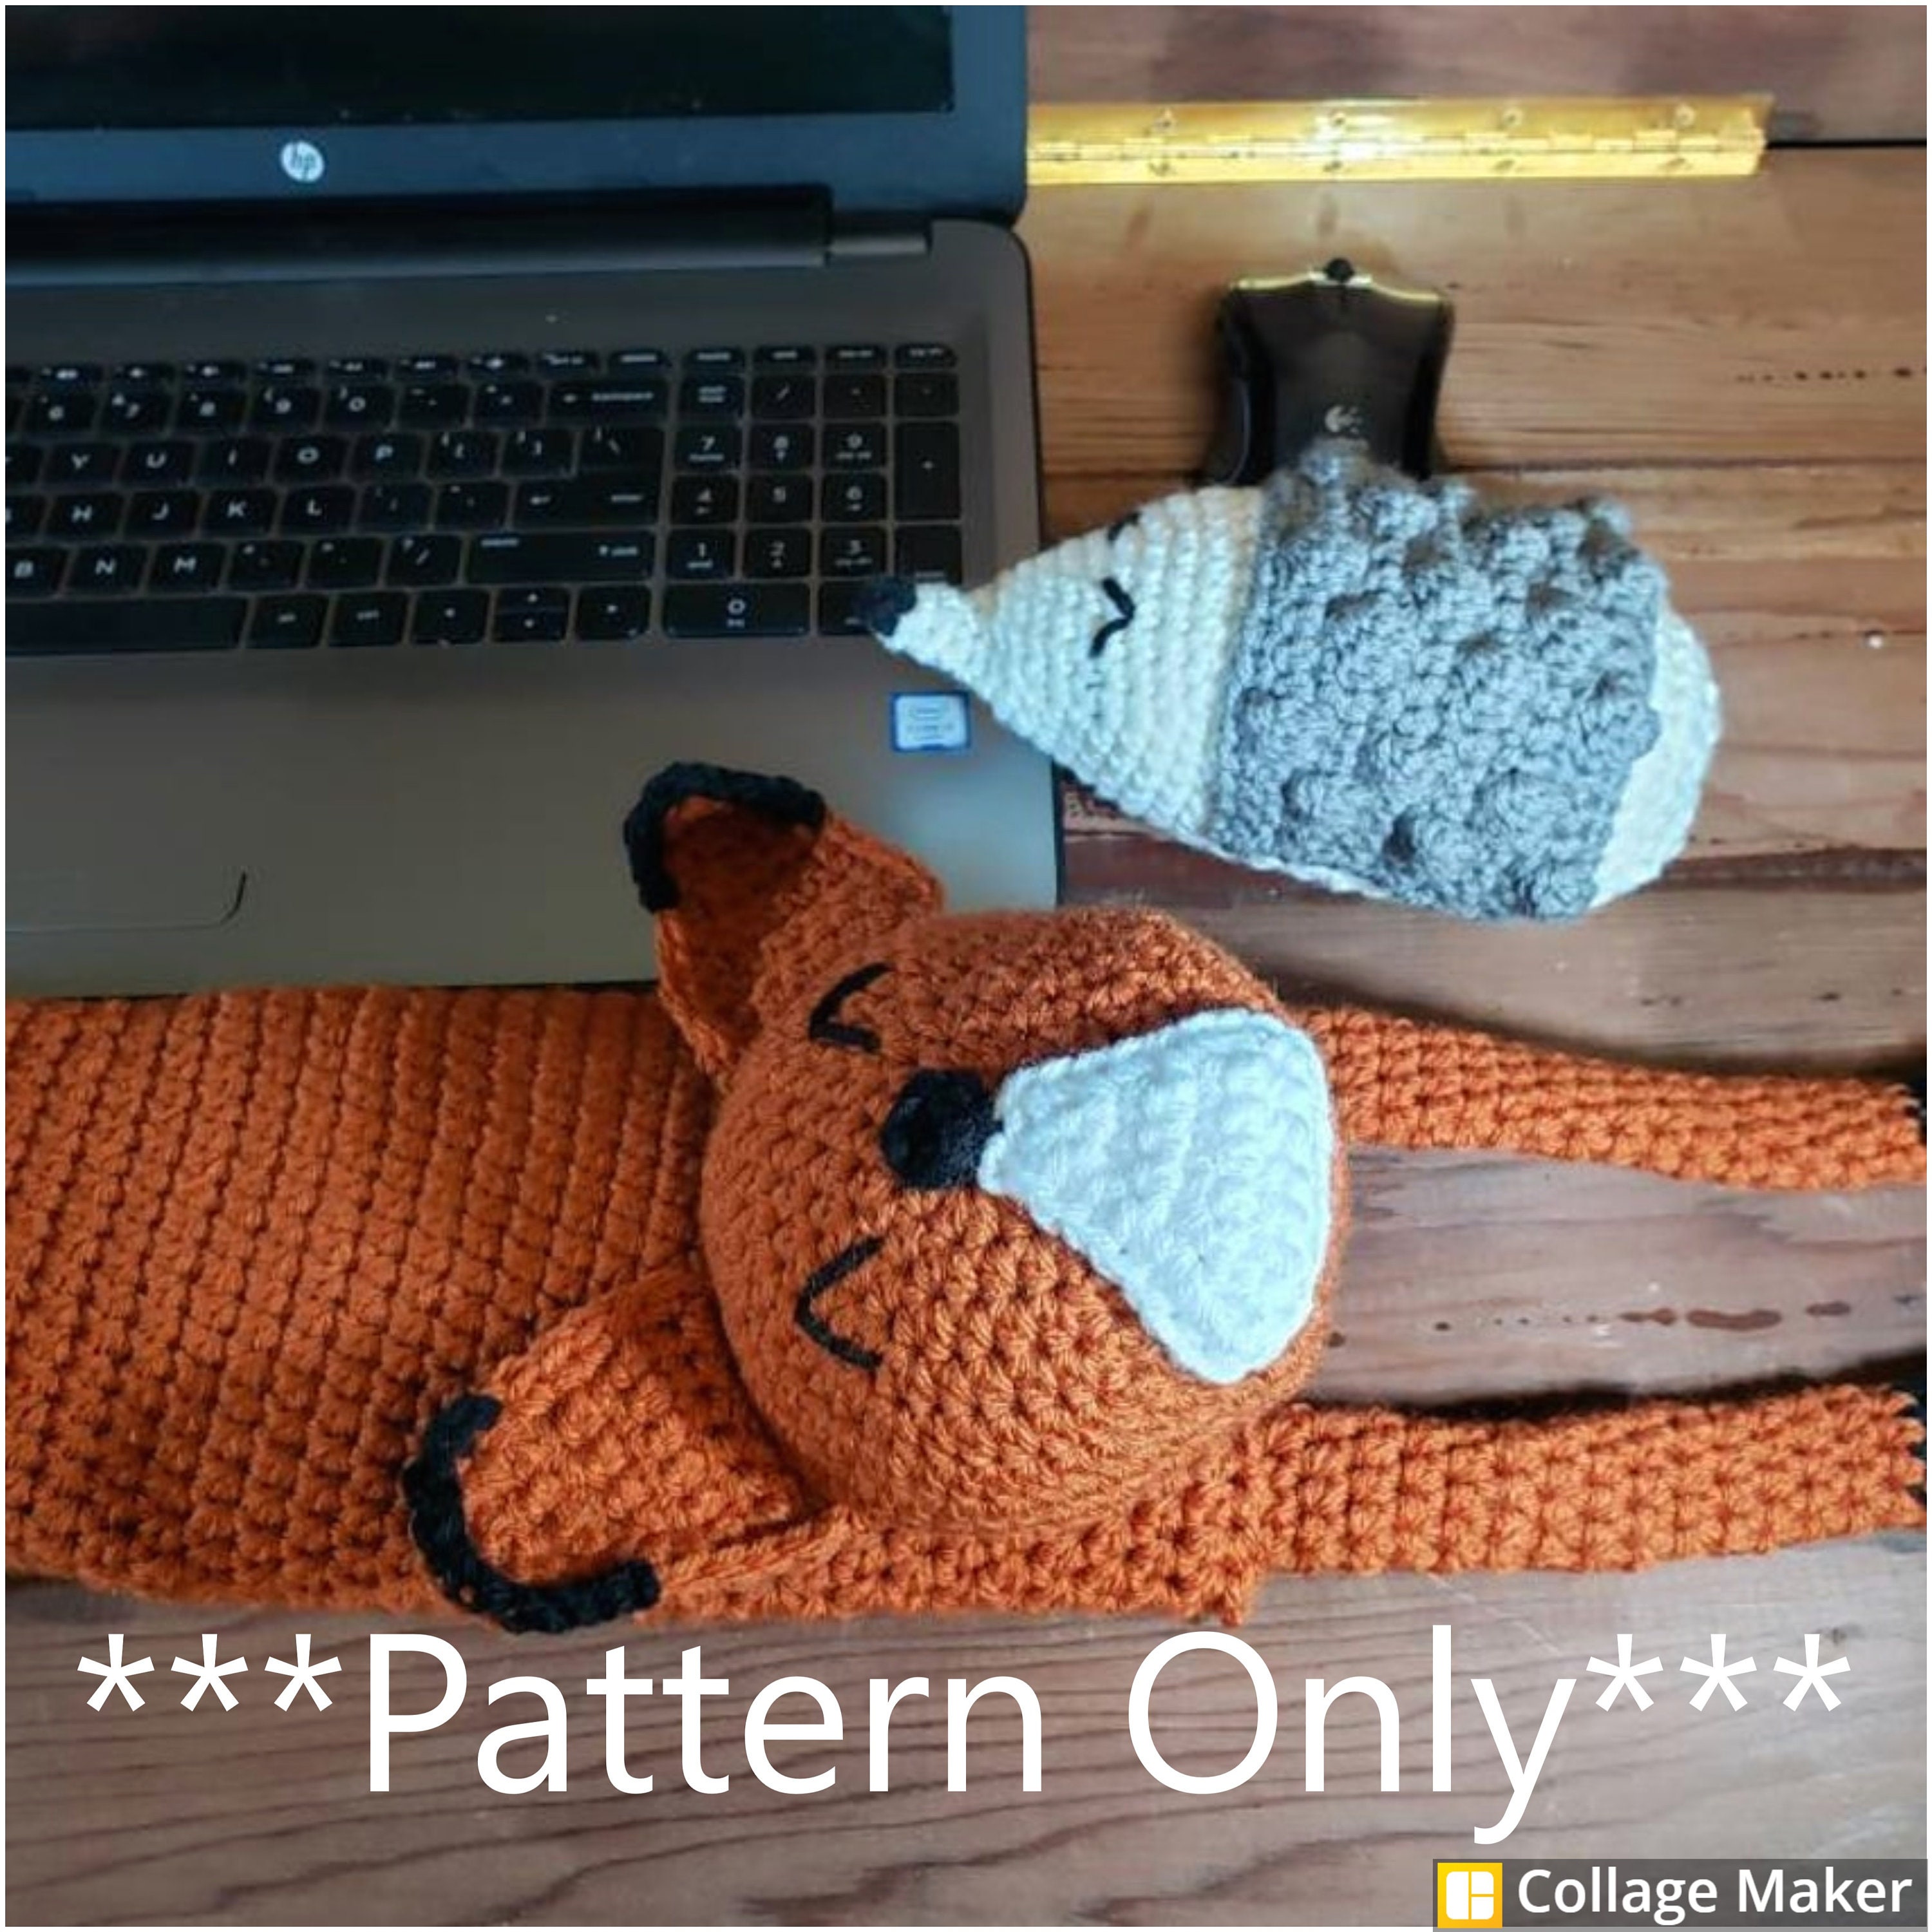 Pet Wrist Rest Cushion: Dog or Cat Padded Support - All Things Crochet -  Mouse Pad